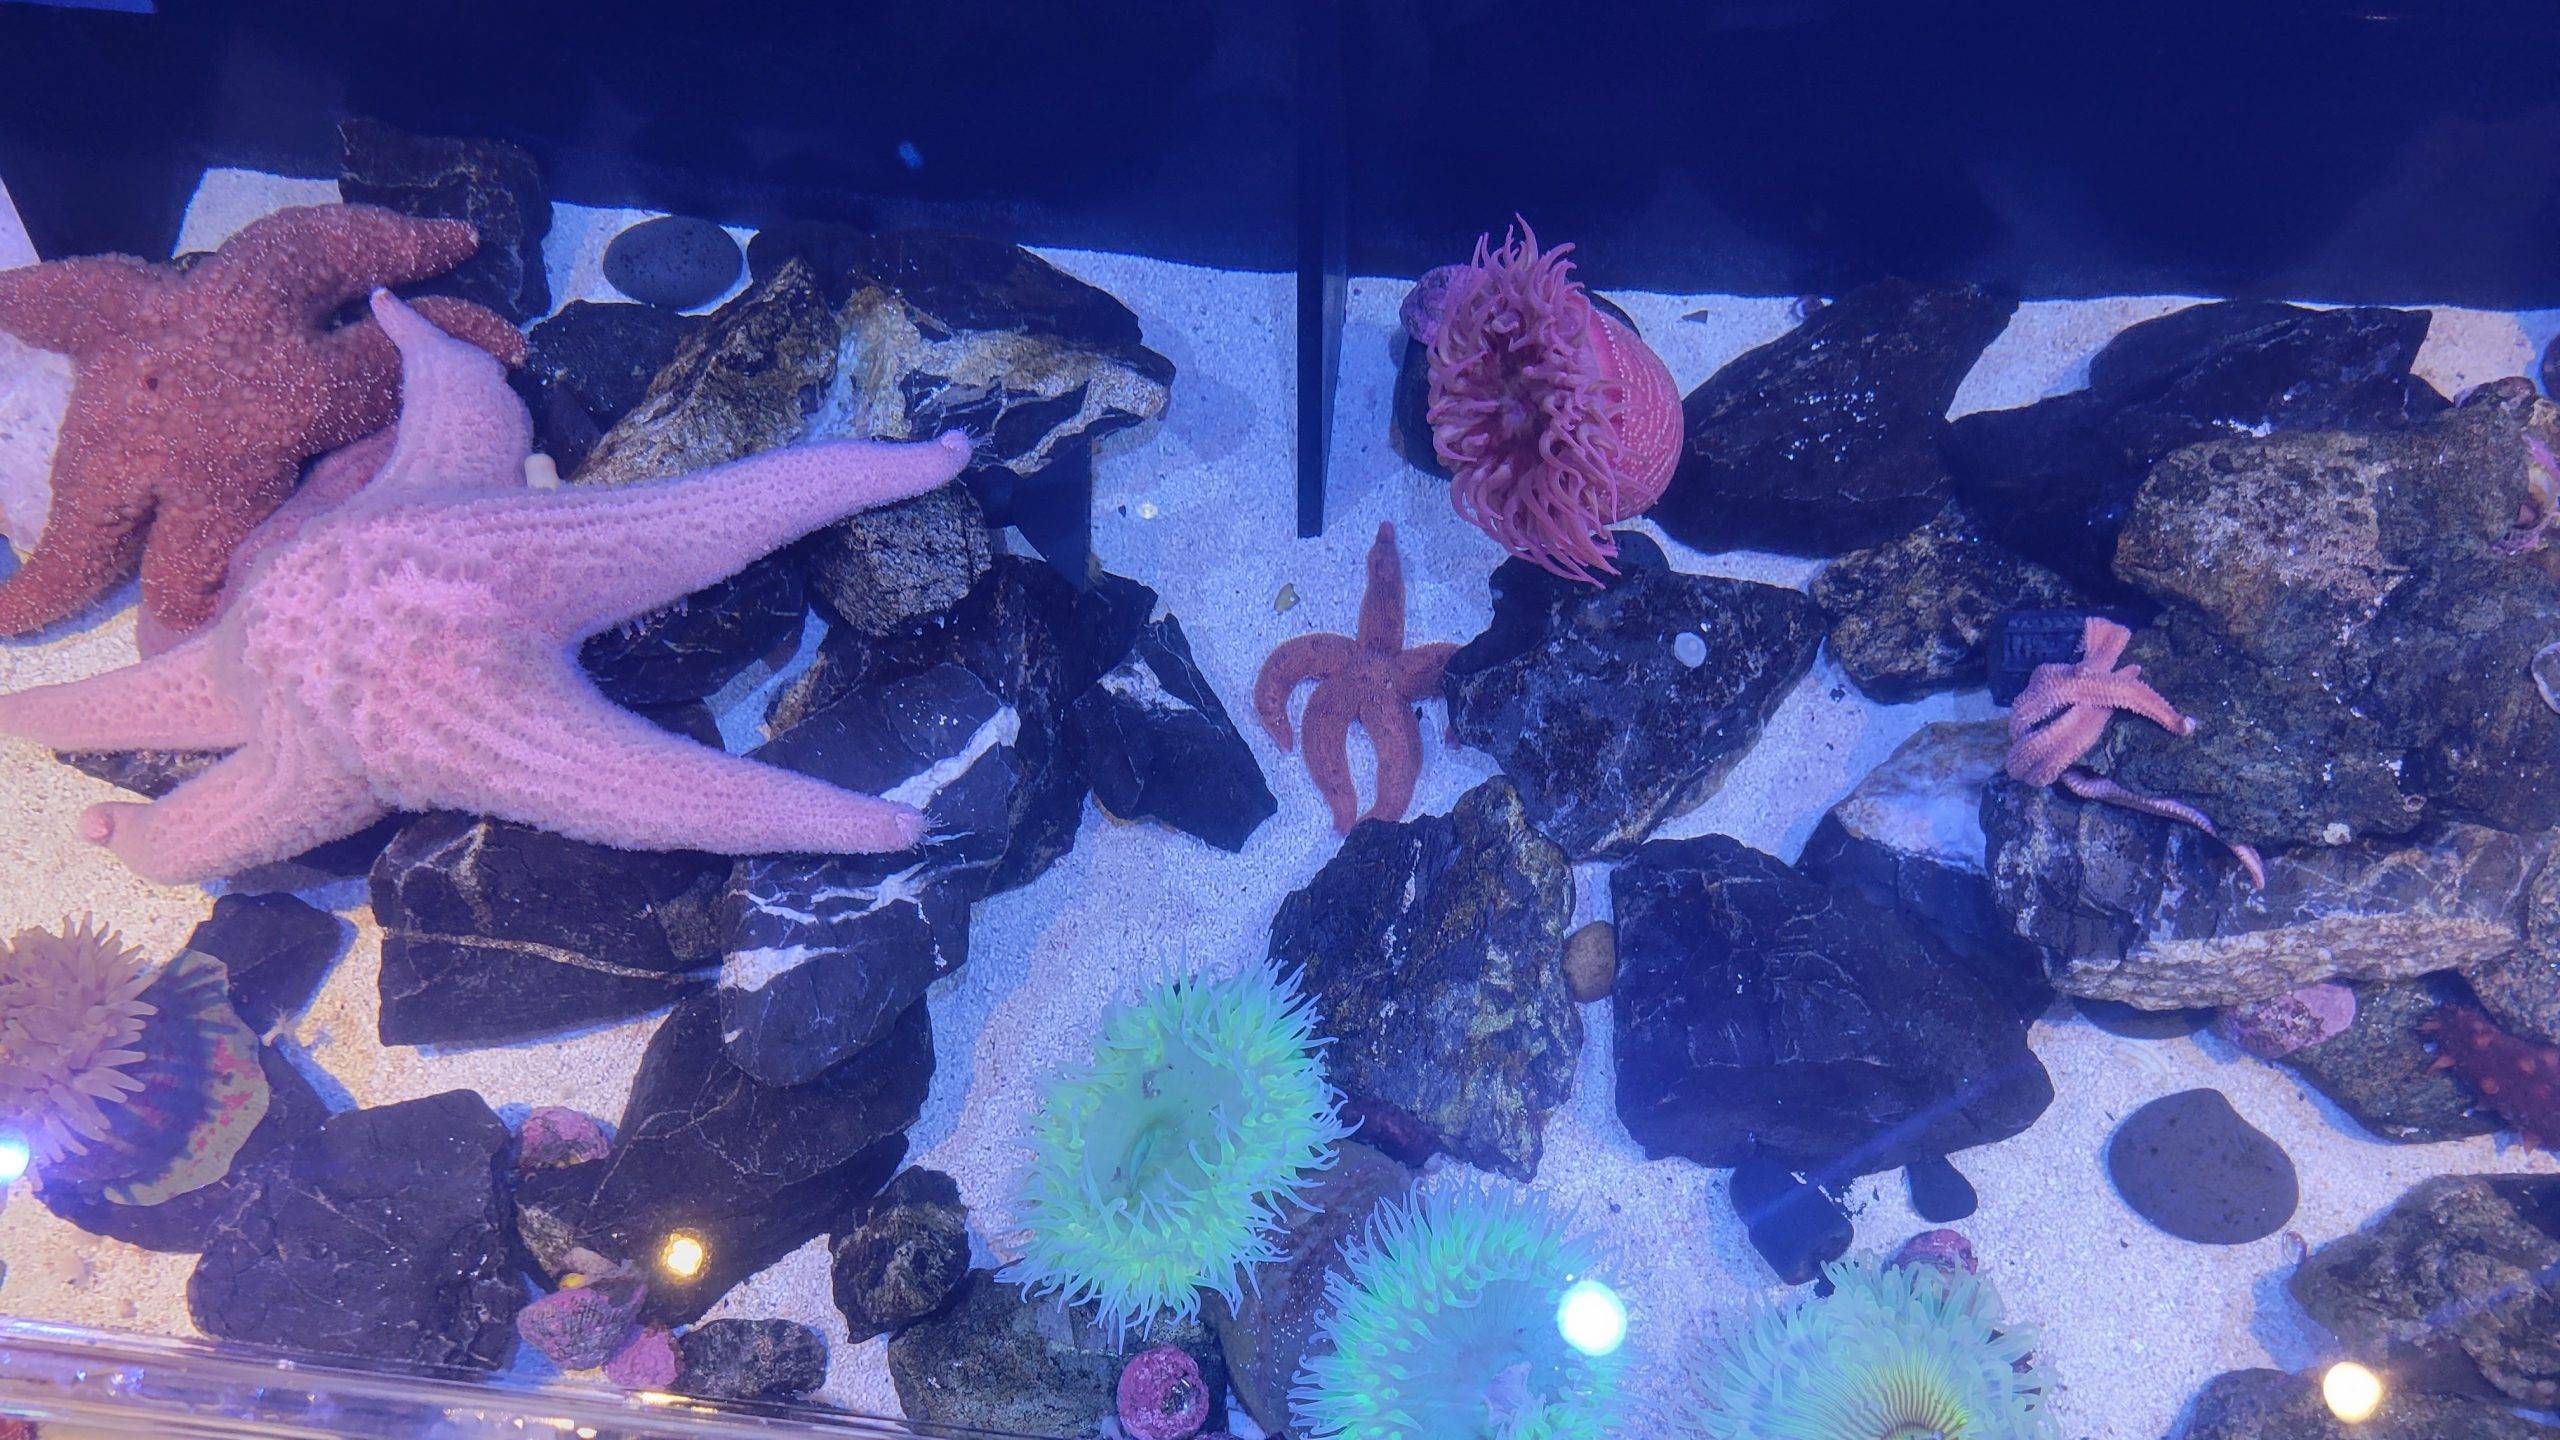 Assortment of starfish and anemones in a touch pool at the Florida Aquarium